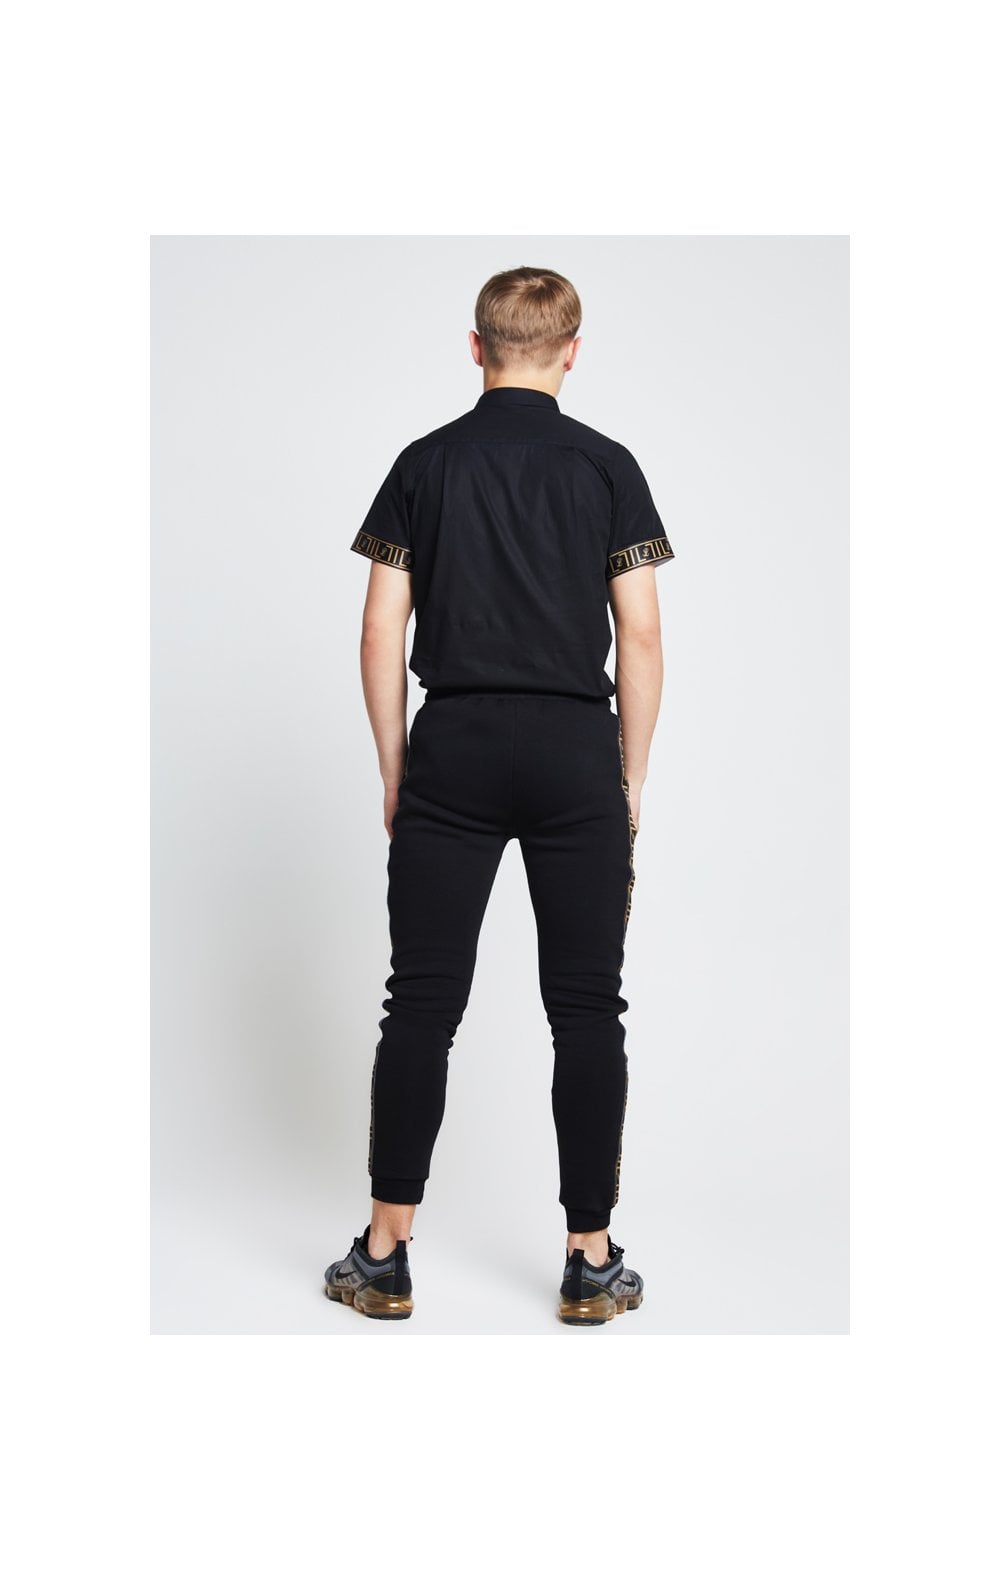 Load image into Gallery viewer, Illusive London S/S Taped Shirt - Black (4)